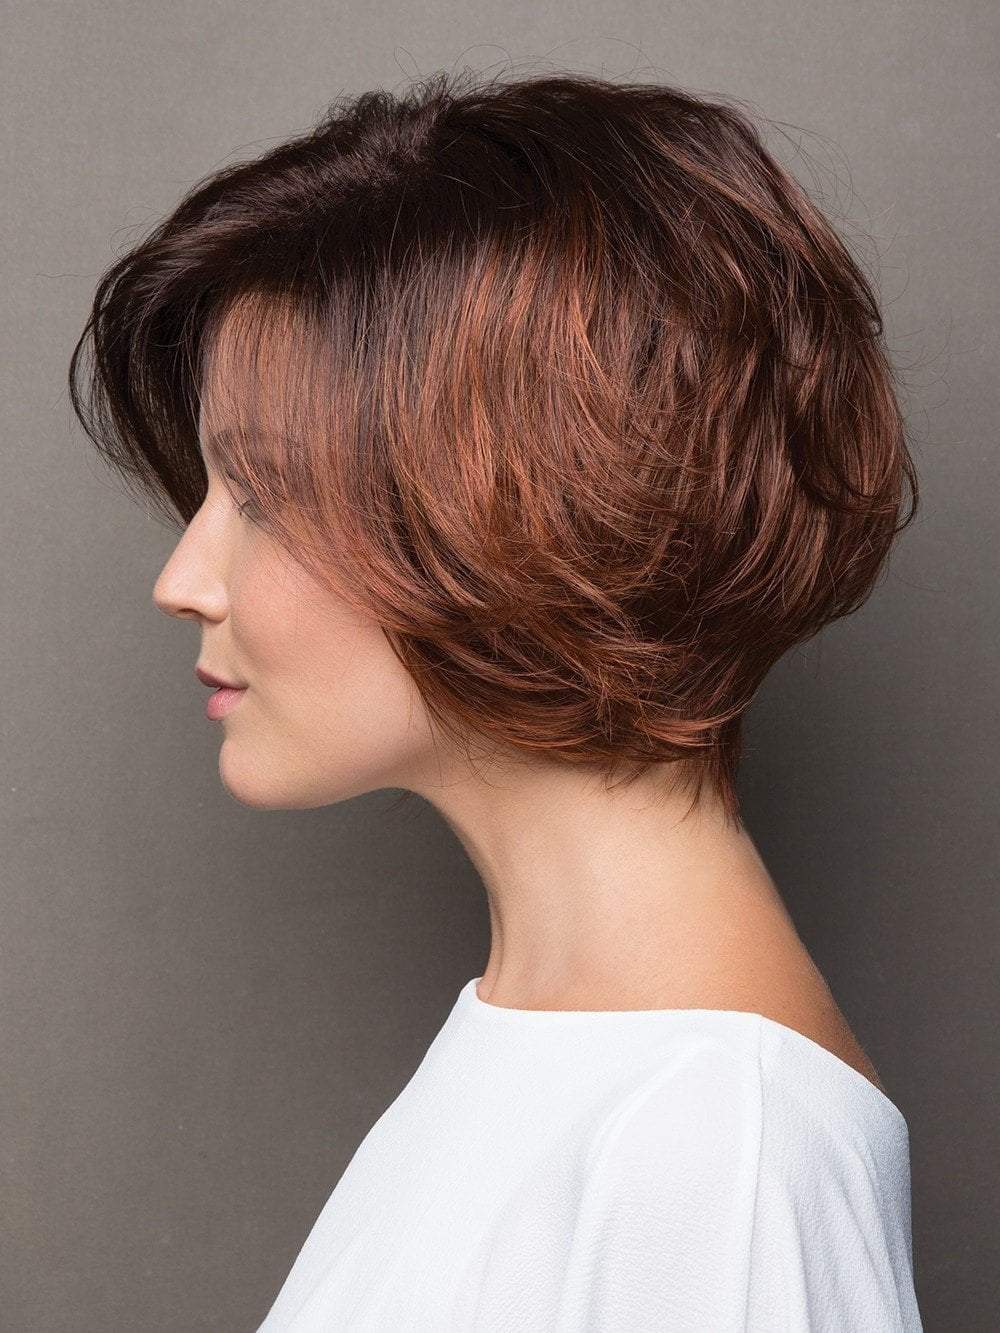 This cut is full of layers and loose waves that create volume and movement.